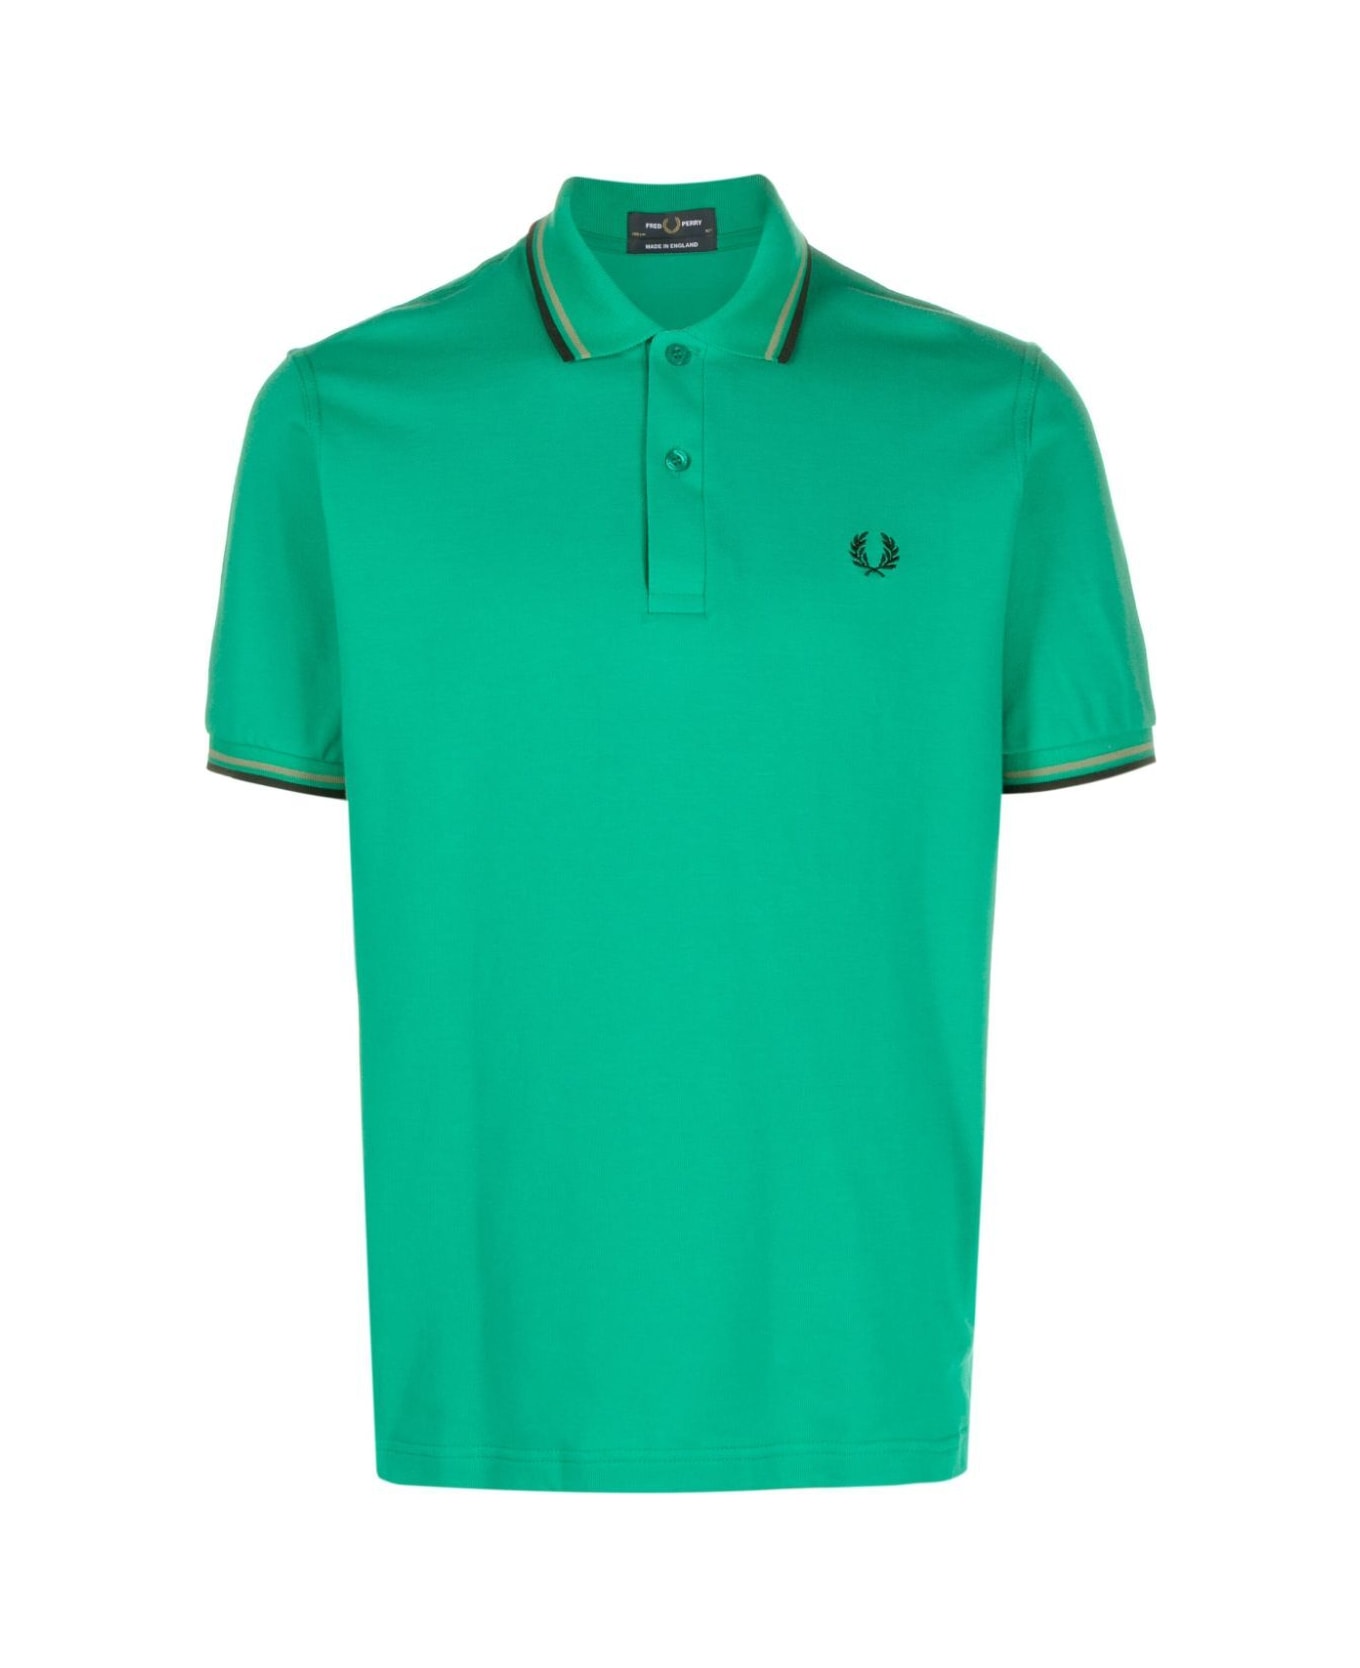 Fred Perry Fp Twin Tipped Shirt - Fpgre Fldgre Blk